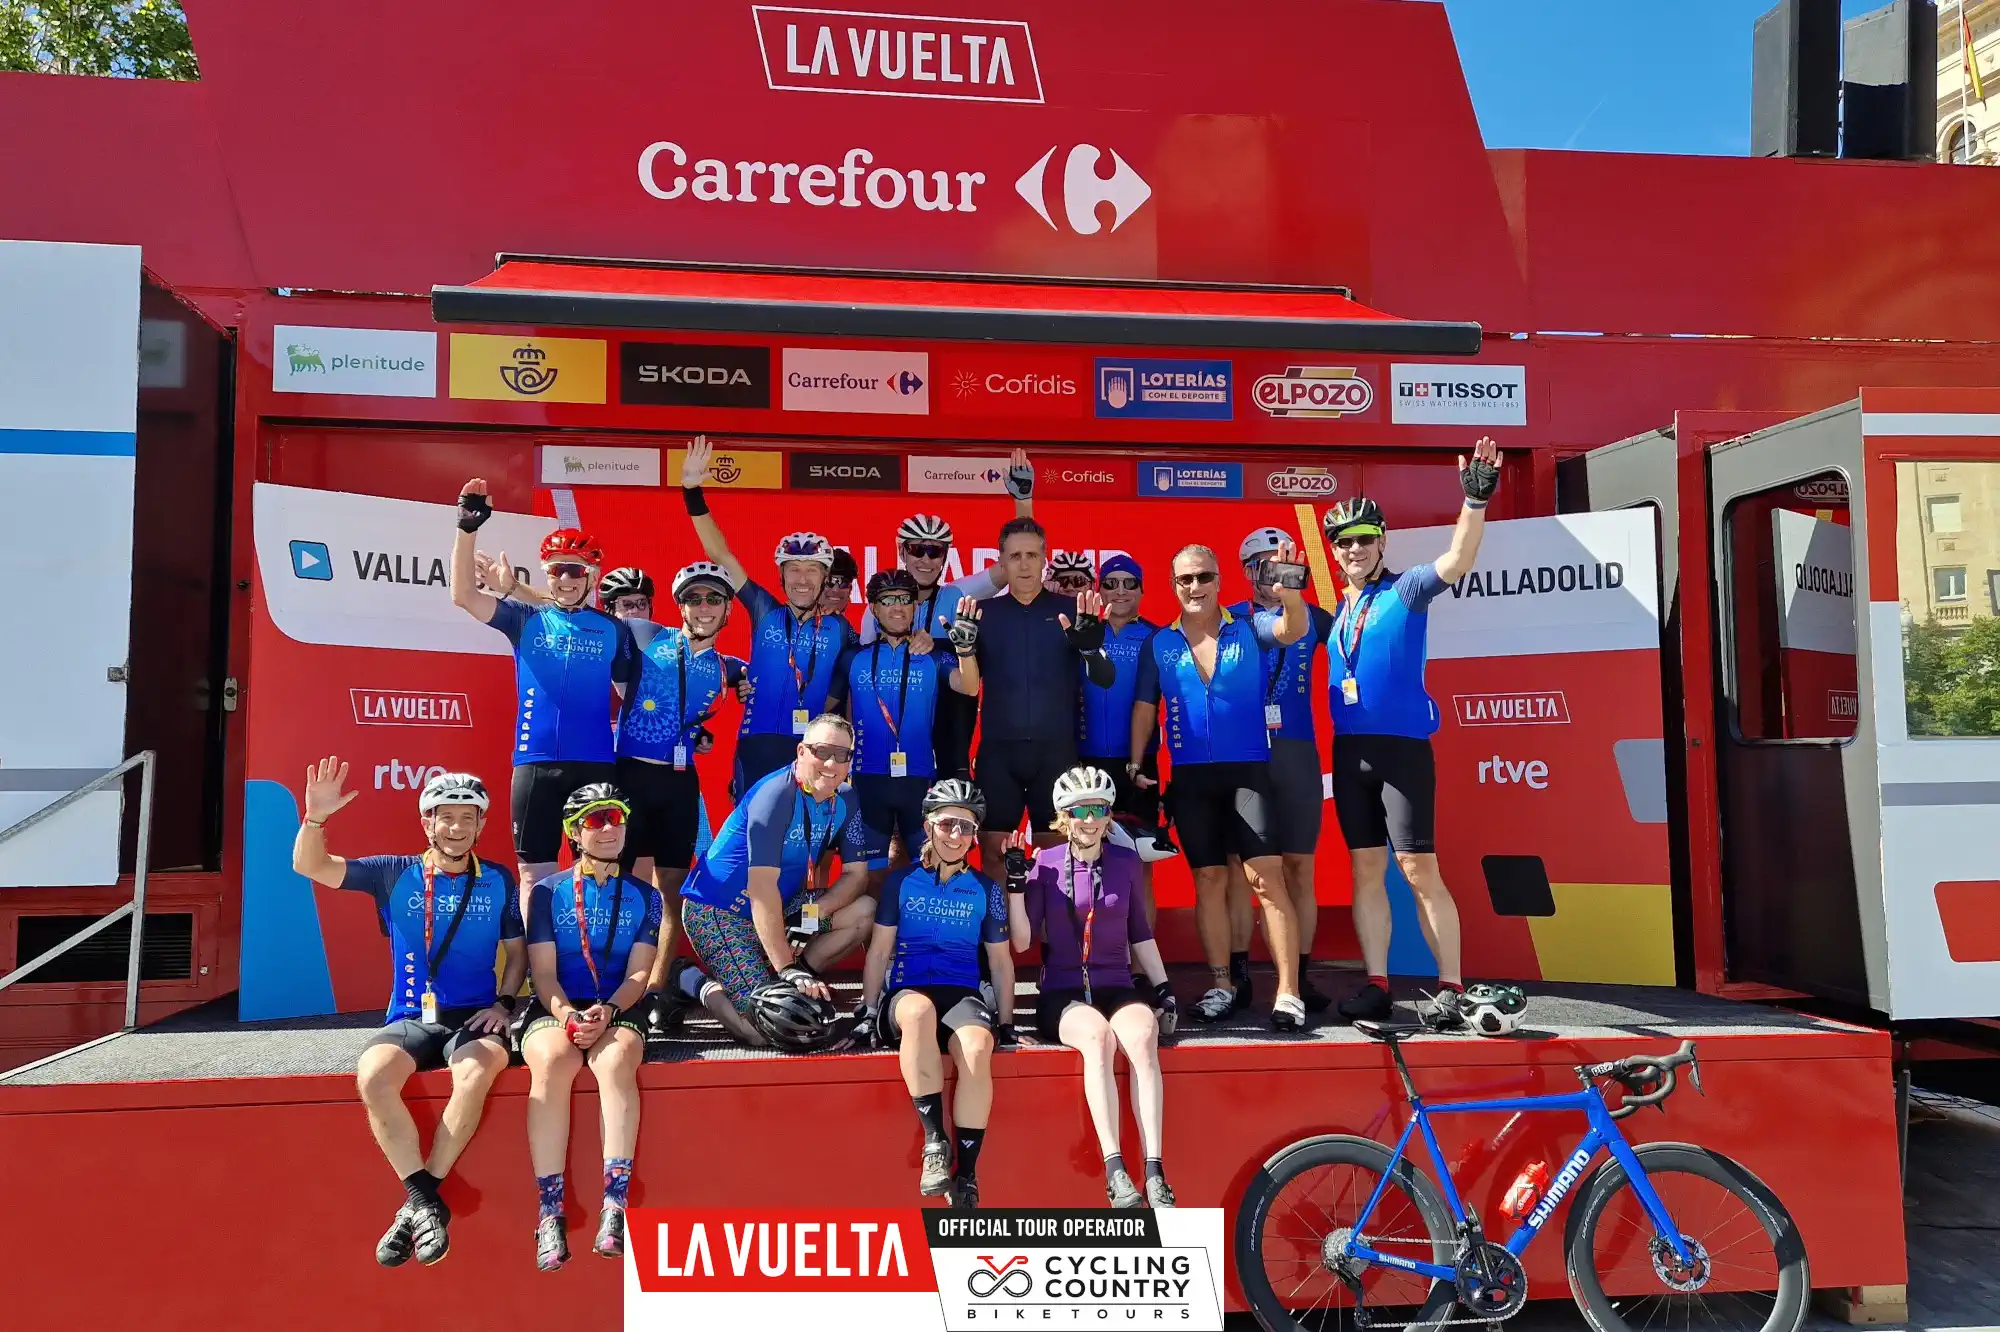 See La Vuelta Cycling Tour, Cycling Country with Miguel Indurain